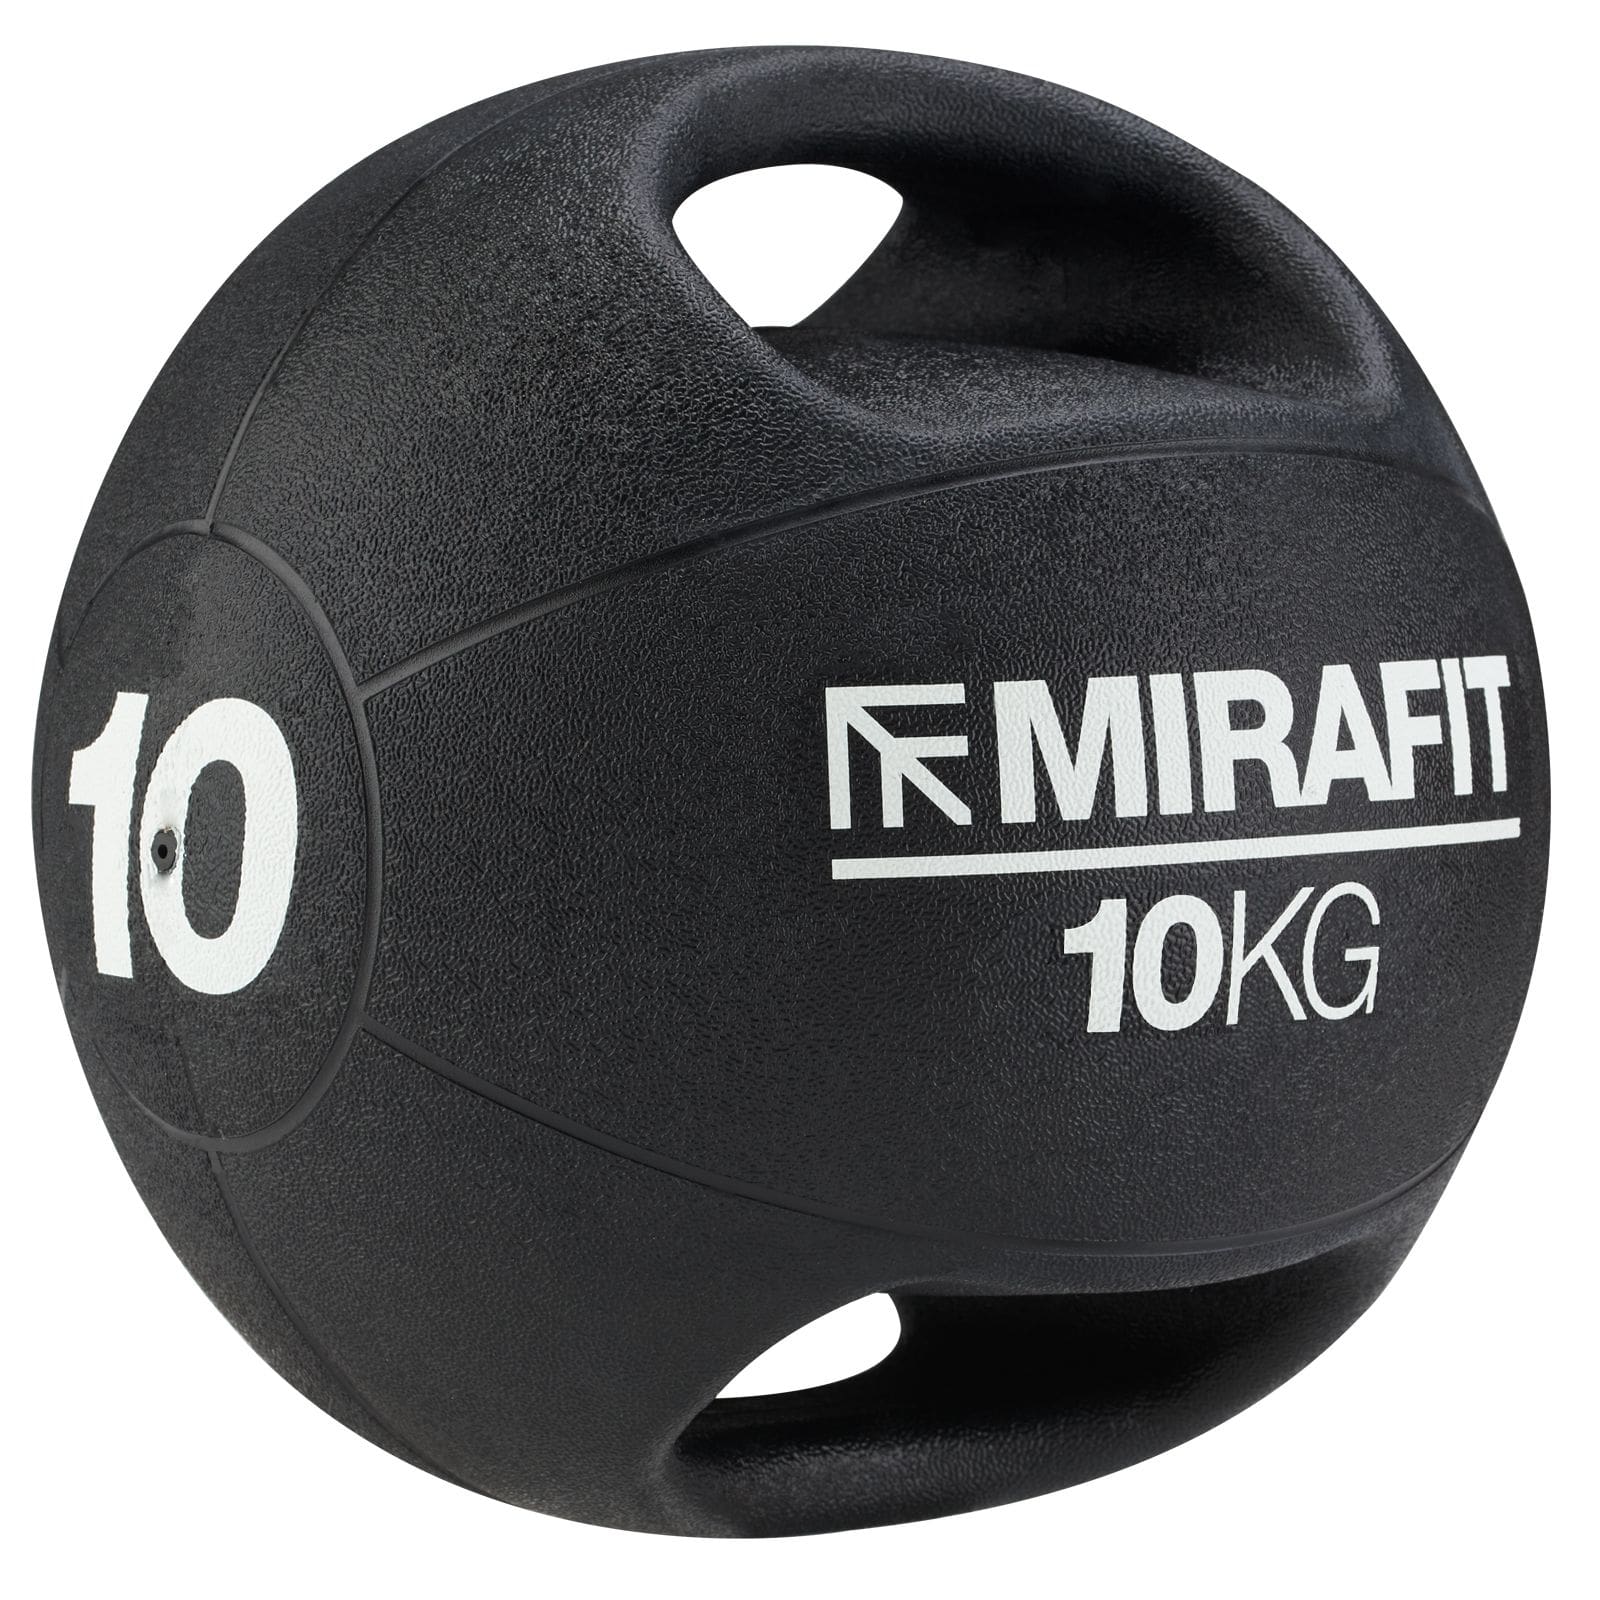 Weights of the Mirafit medicine ball with handles Review & Price